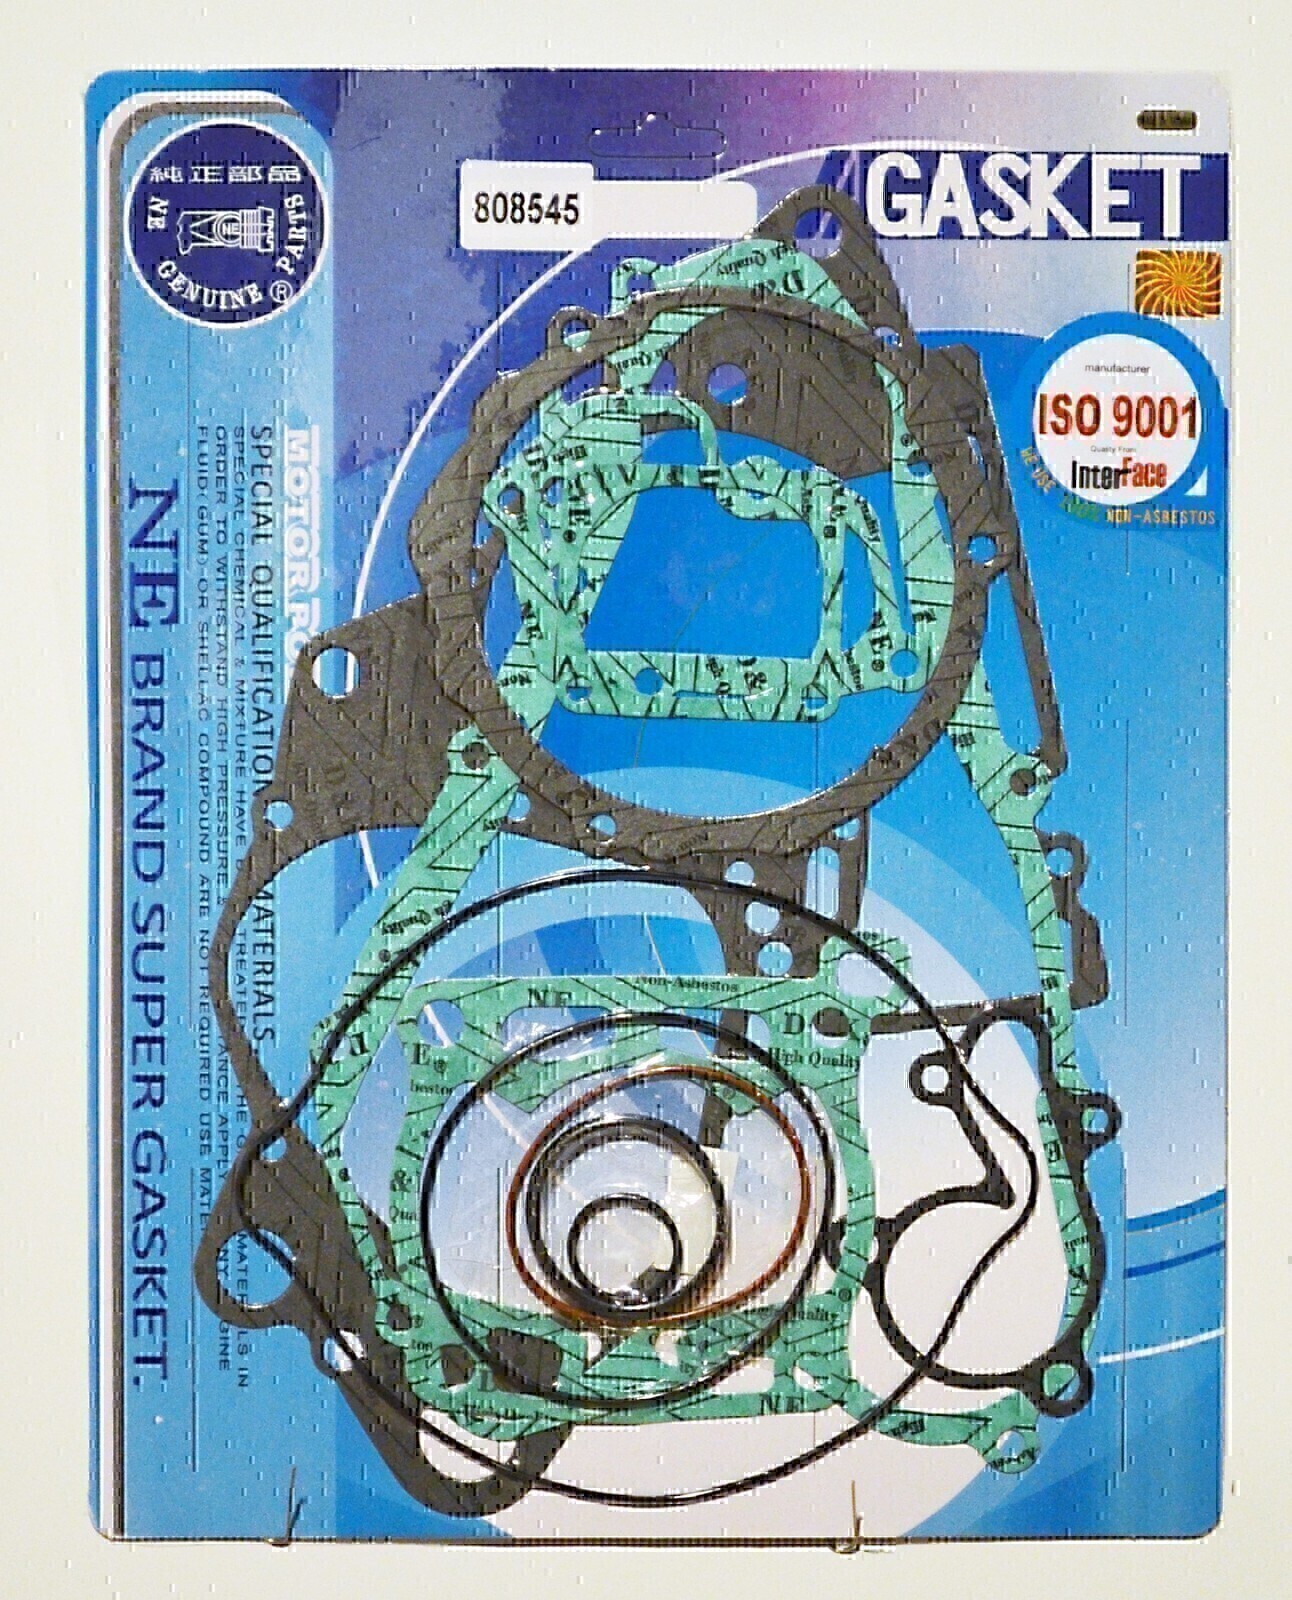 COMPLETE GASKET KIT FOR SUZUKI RM125 RM 125 1991